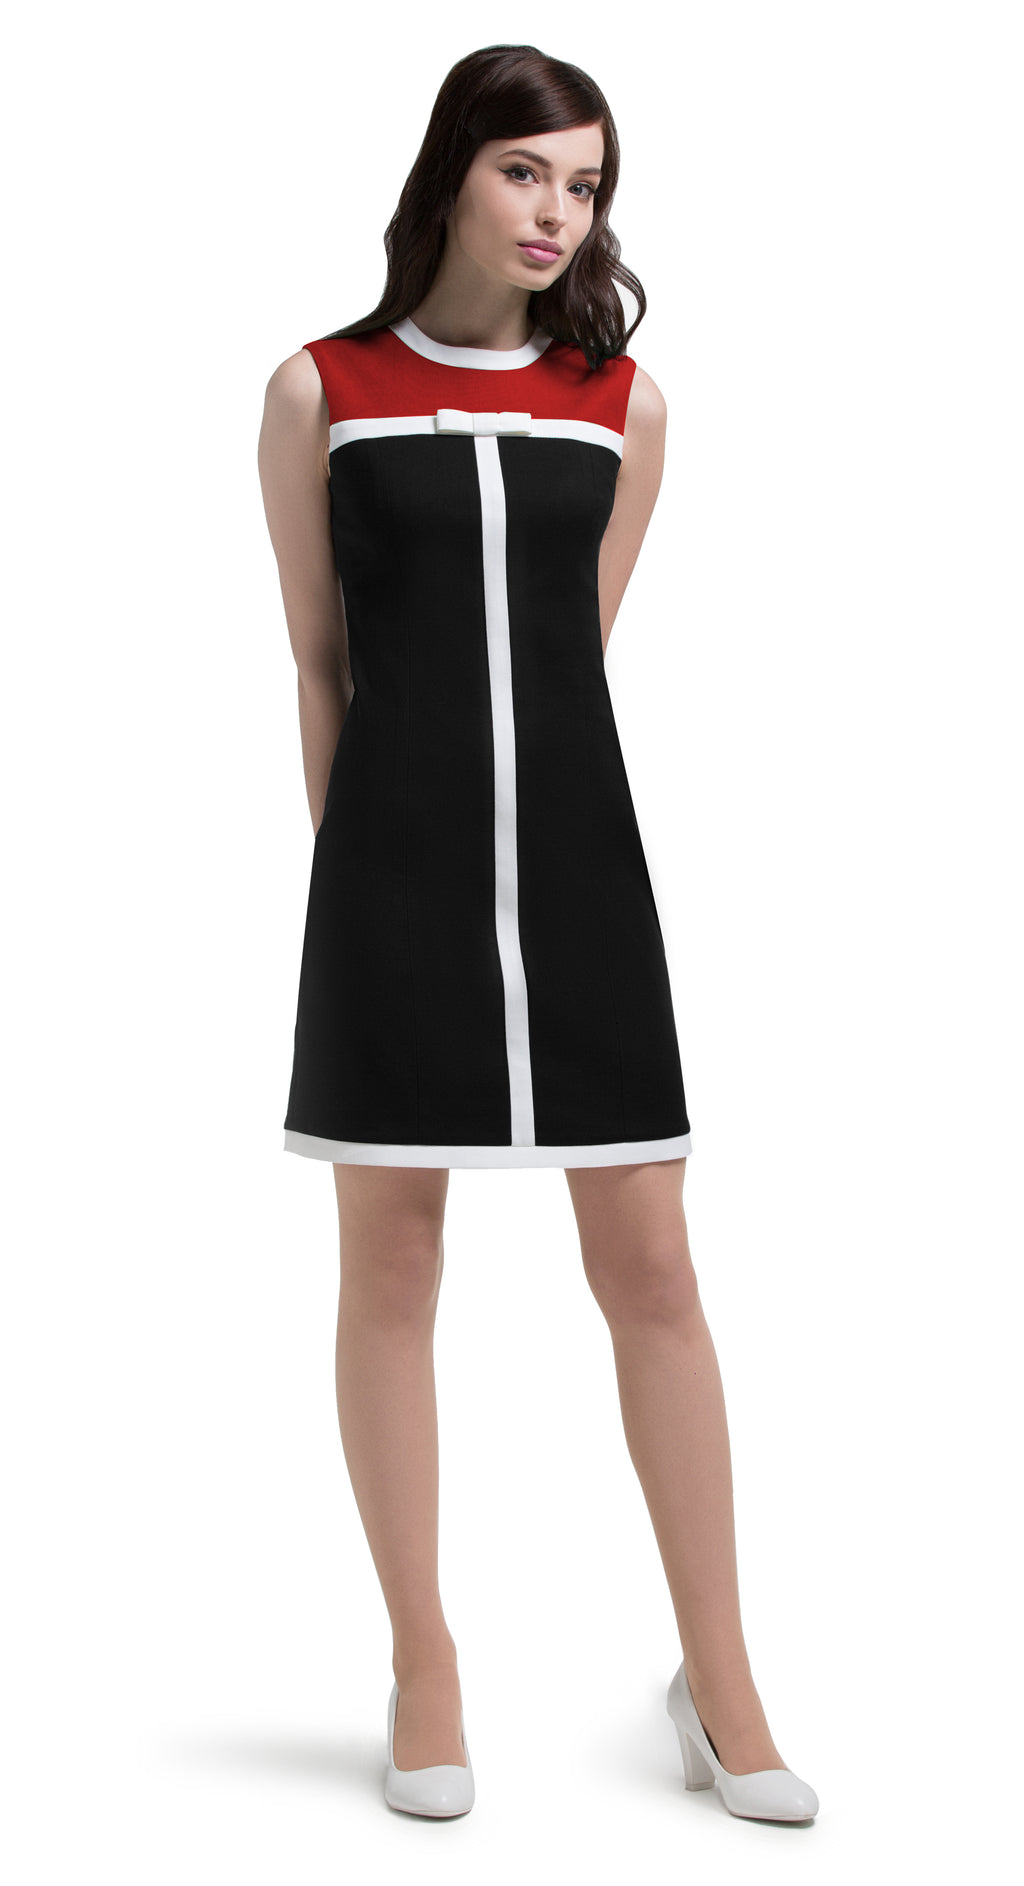 This slightly a-line Italian cotton dress has casual elegance and makes a confident cool immediate impression. The vintage aesthetic allows for the front top panel to work in a variety of colours complementing the dress whether opting for original black, contrasting red and black or contrasting green and black. Choose the bespoke option if you prefer sleeves or different colours.